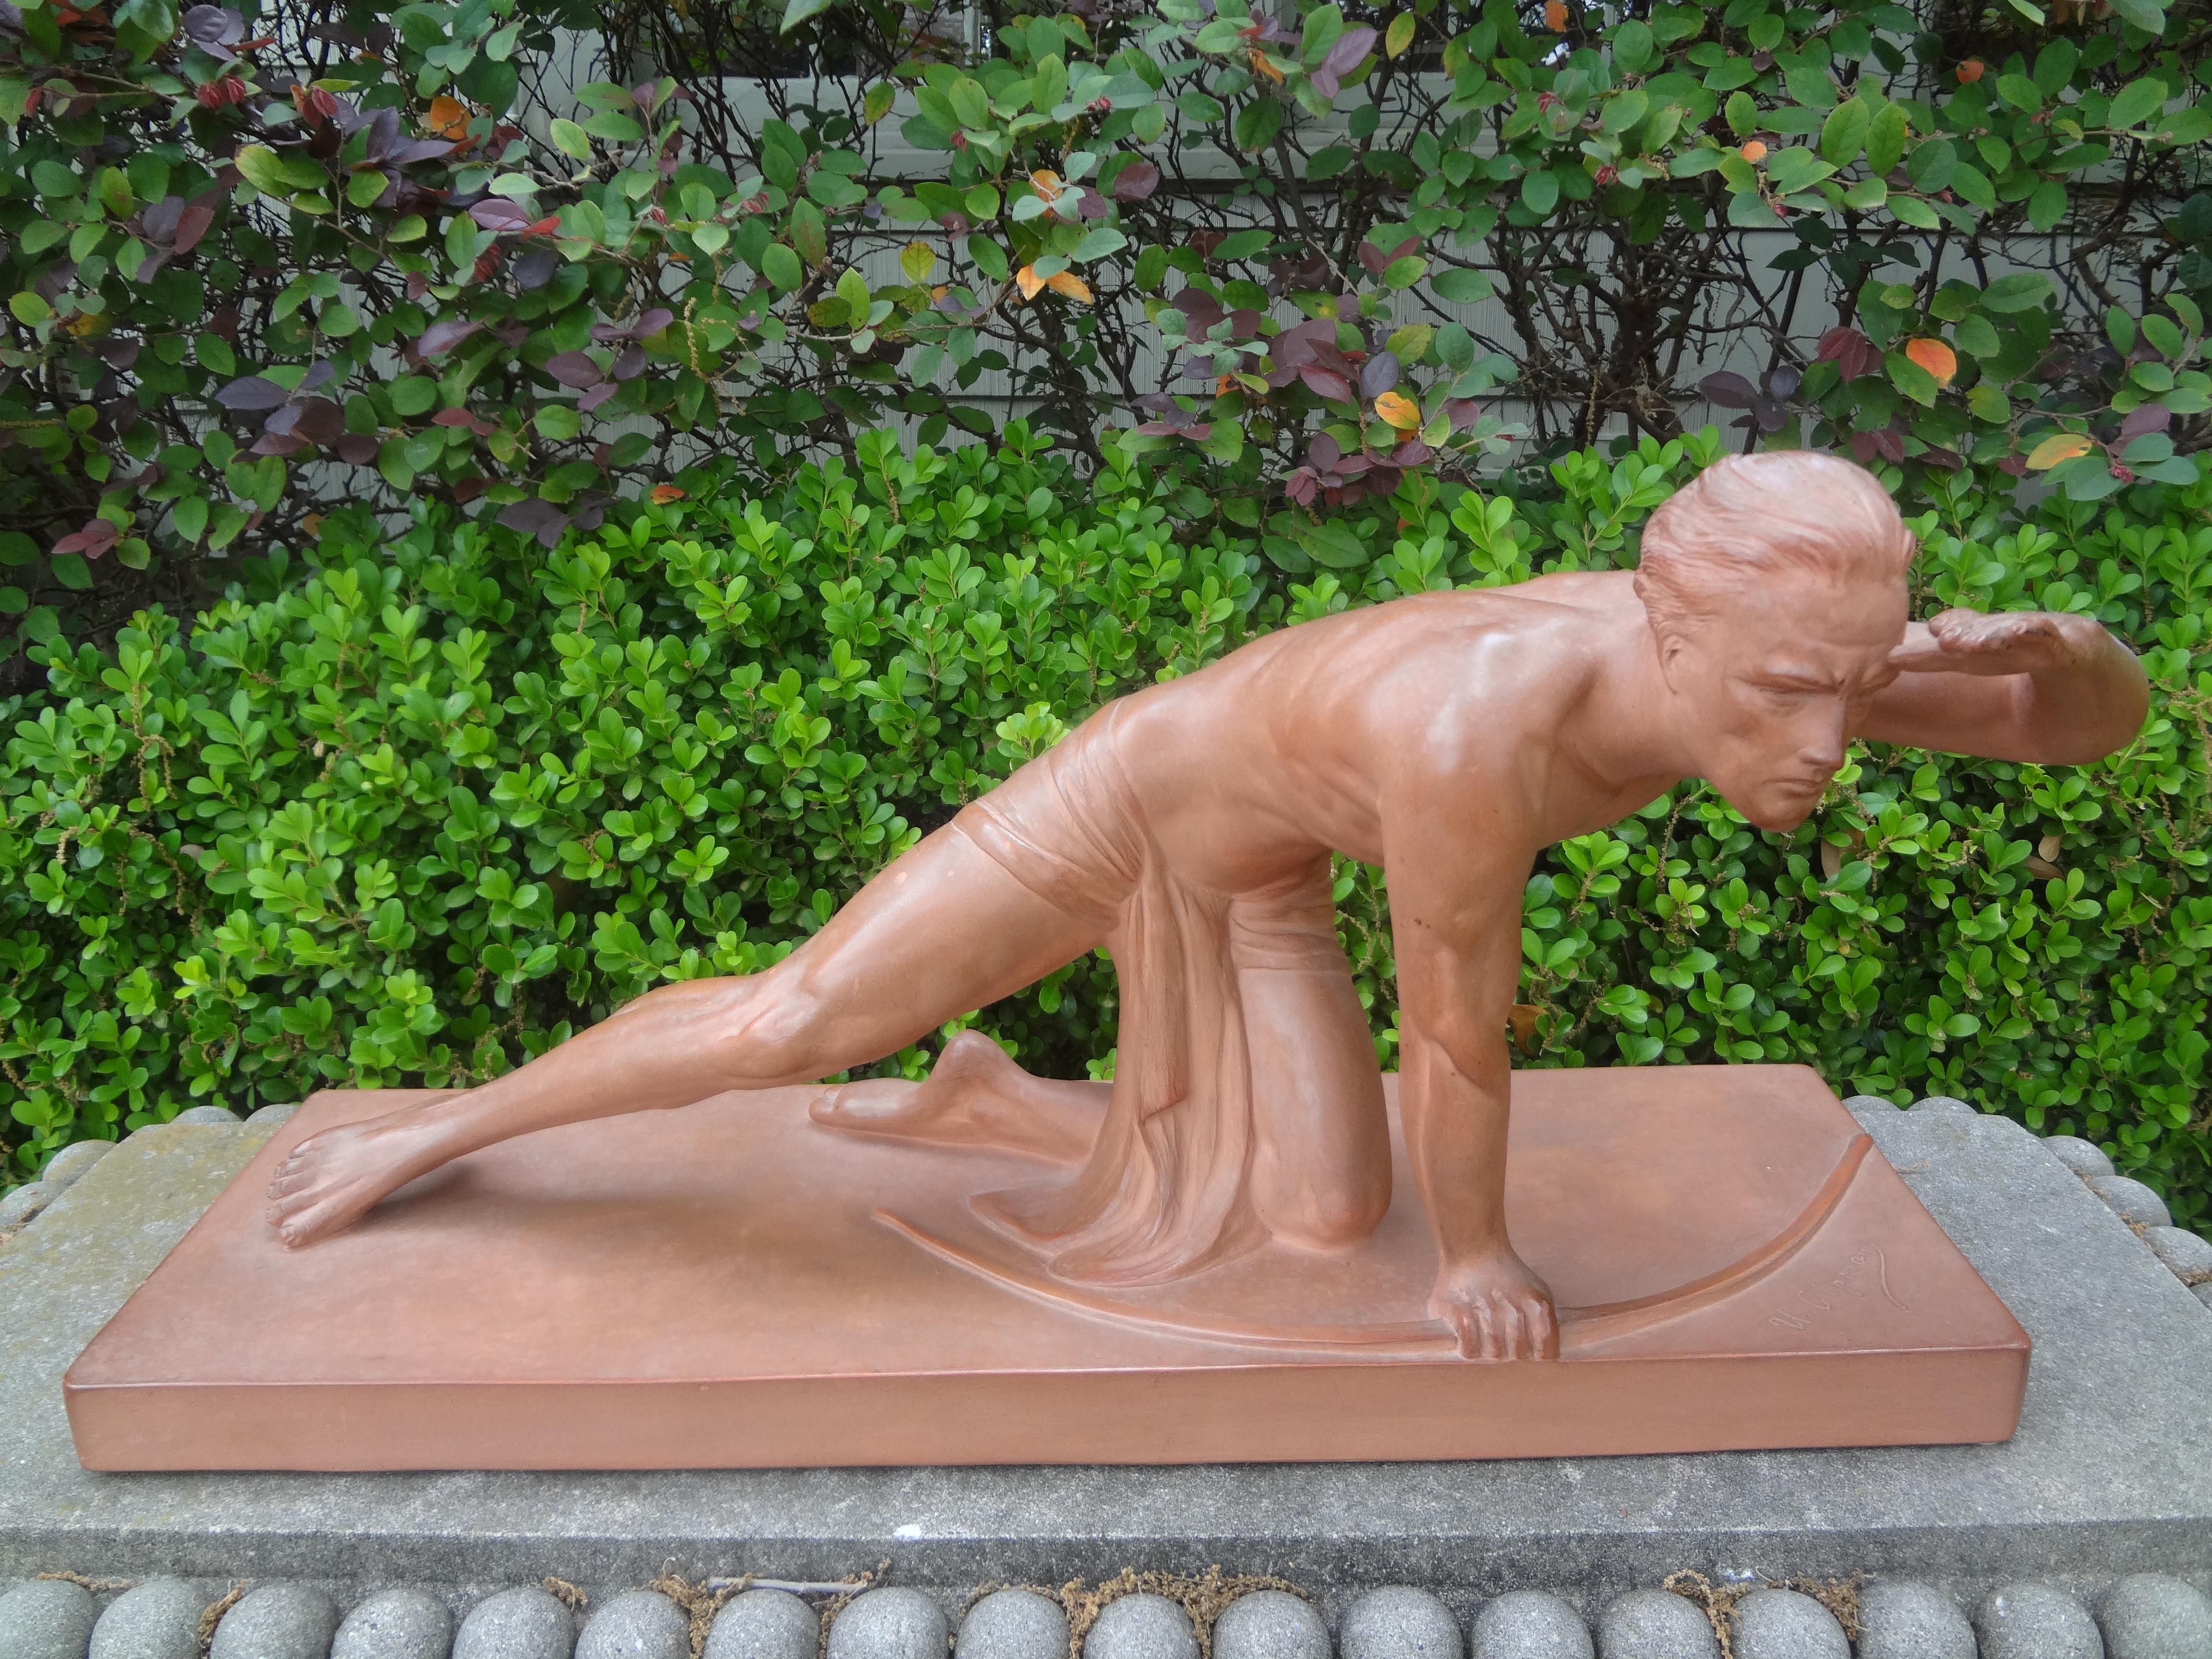 Italian Art Deco terracotta sculpture signed U. Cipriani.
Italian Art Deco terracotta sculpture of a male athlete artist signed, Ugo Cipriani.
This terra cotta sculpture is finely detailed and in very good antique condition.